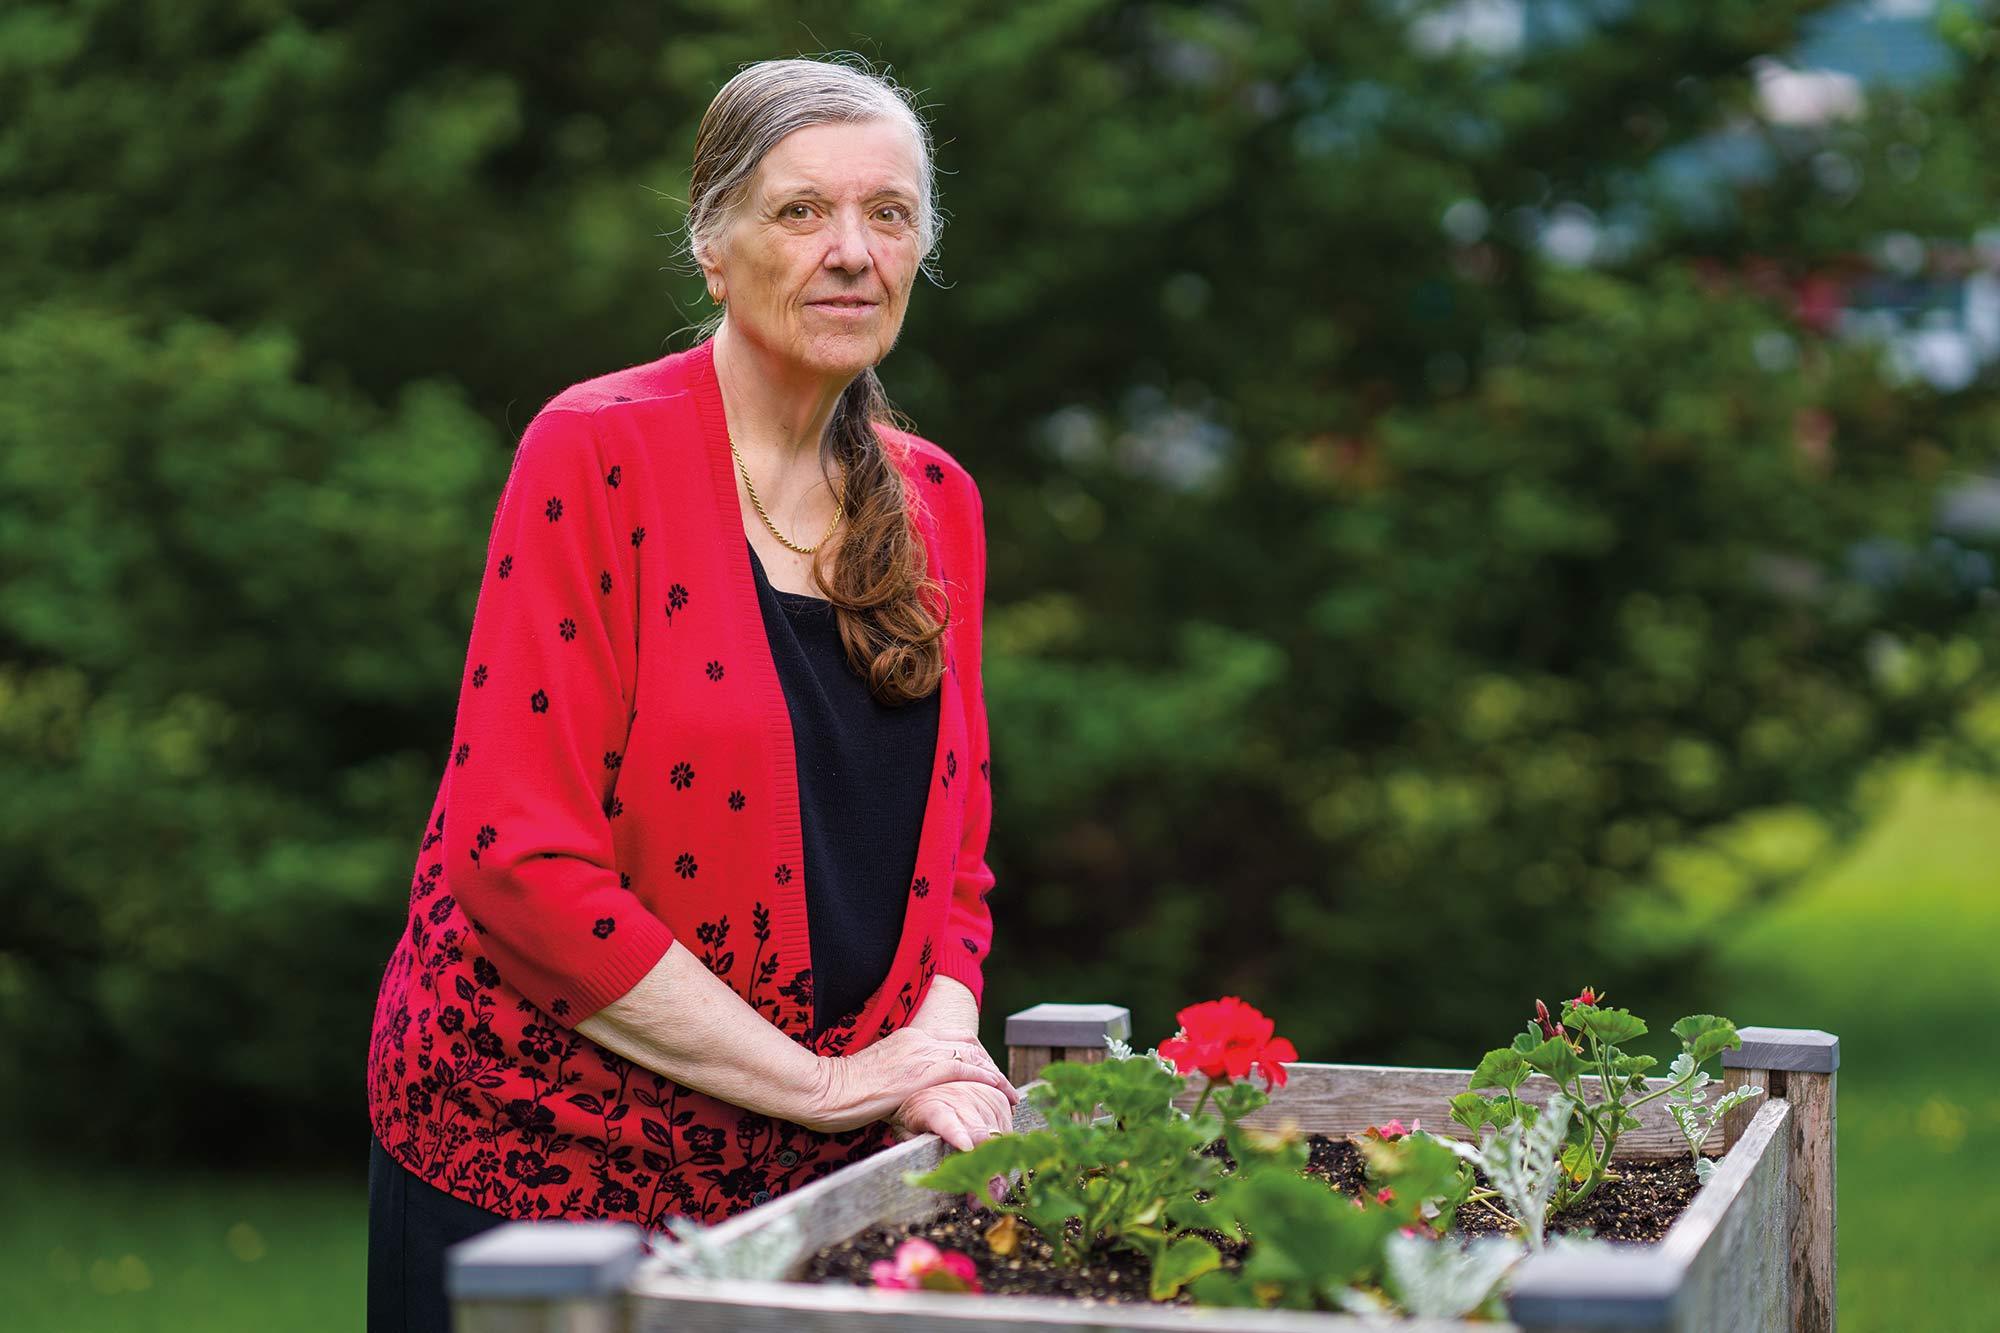 Colette Helene in a red sweater over a black shirt, standing over a raised garden bed